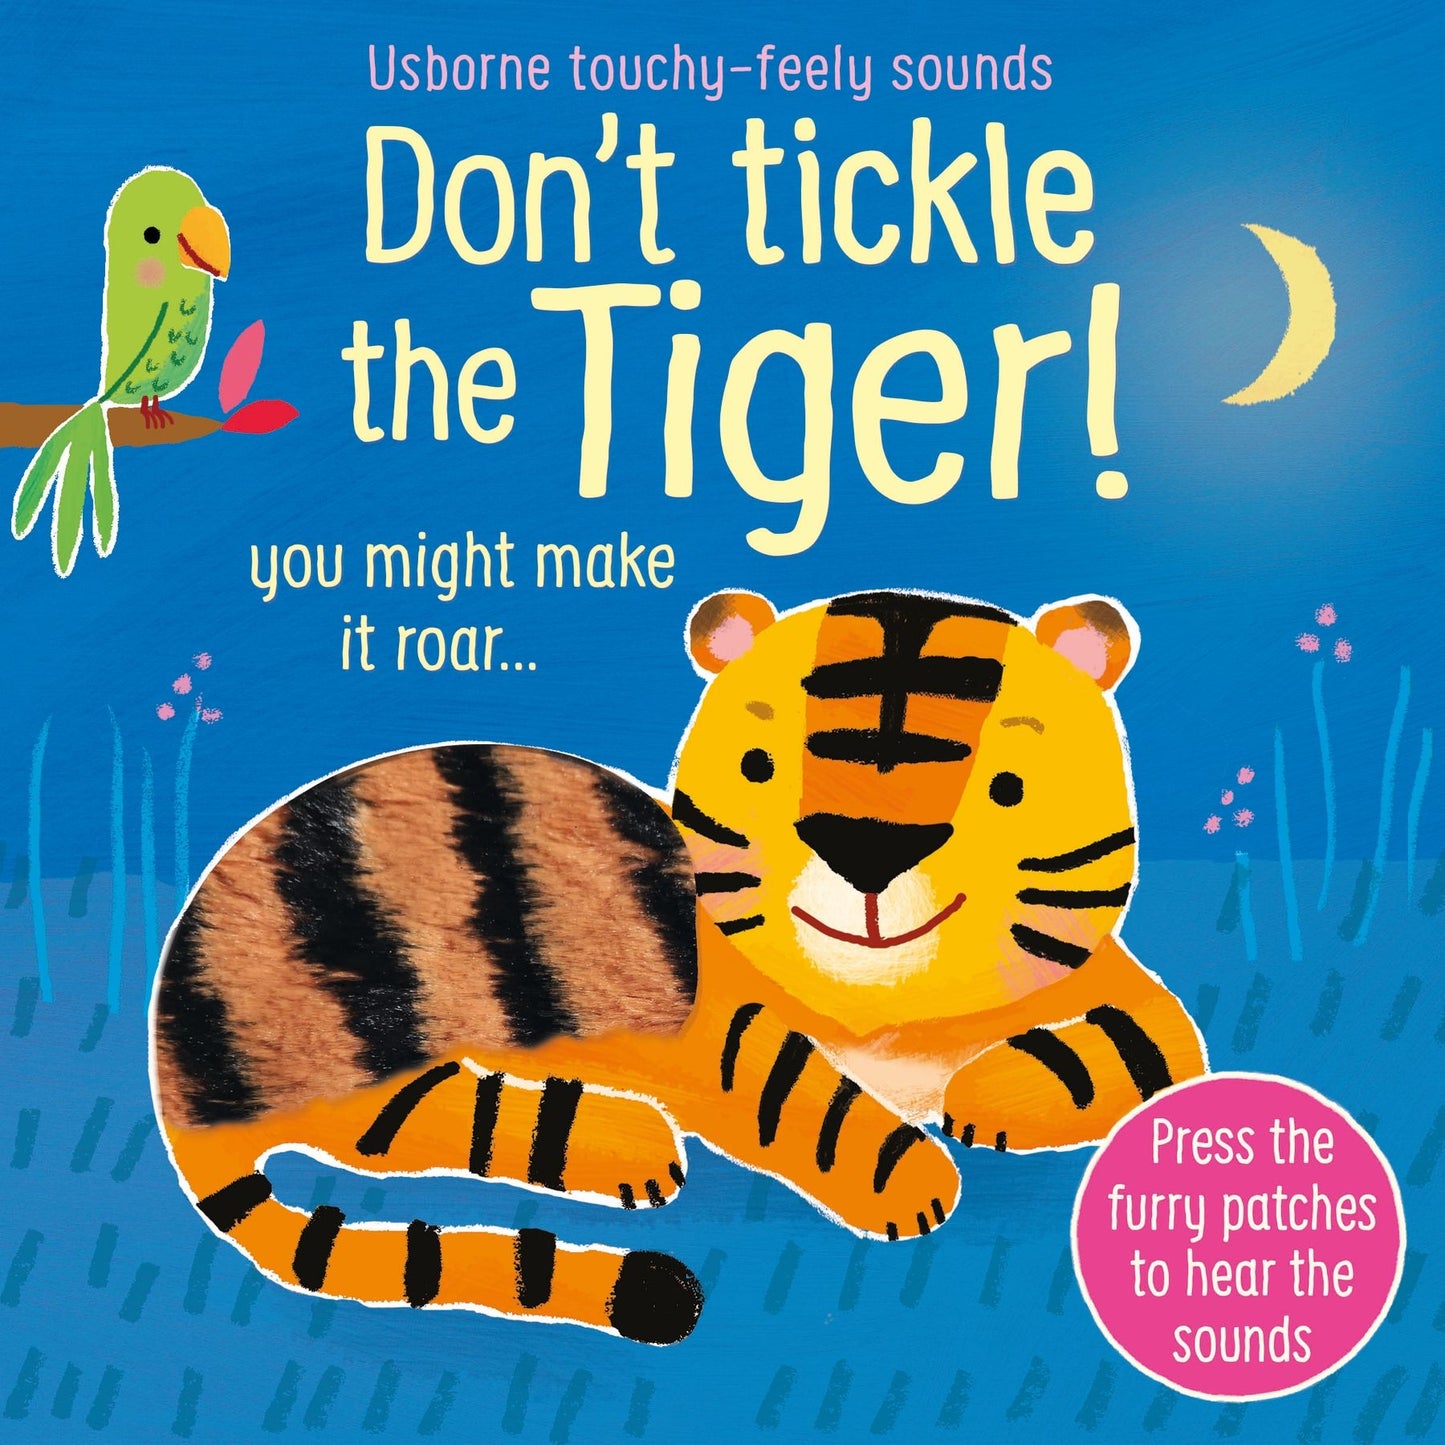 Don't Tickle the Tiger! - Usborne Touchy-Feely Sounds